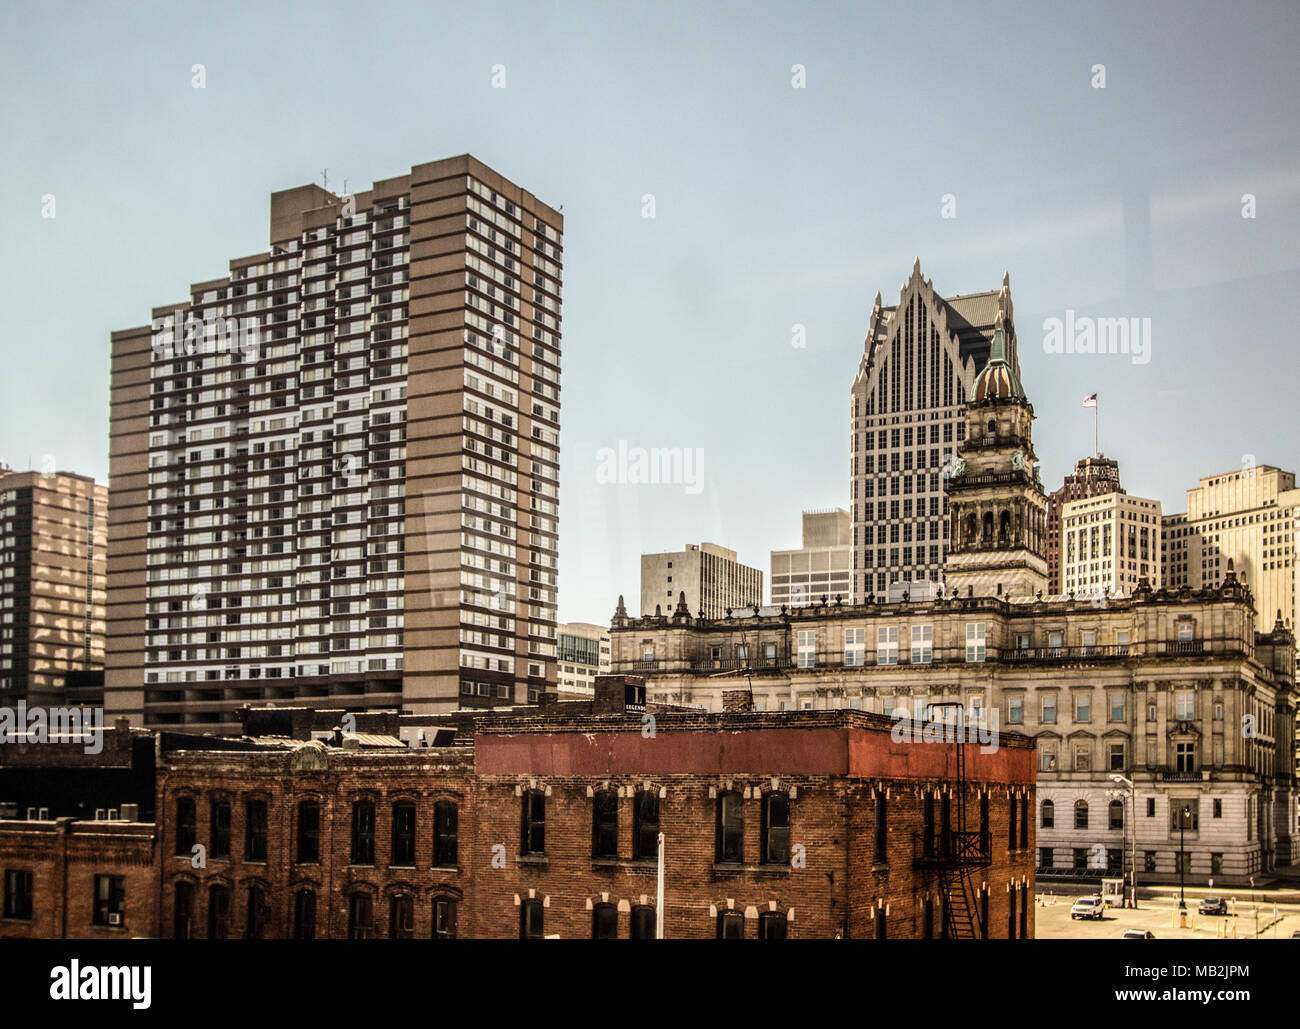 Detroit Michigan Cityscape. Downtown Detroit Michigan urban skyline. Detroit is the largest city in the state of Michigan. Stock Photo